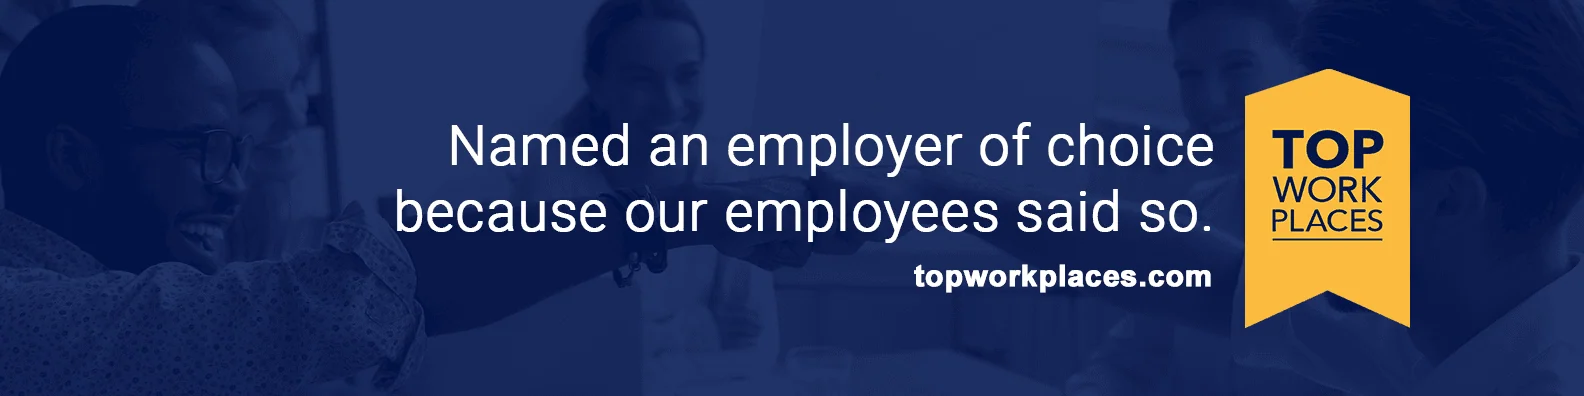 Top Workplaces banner that reads, 